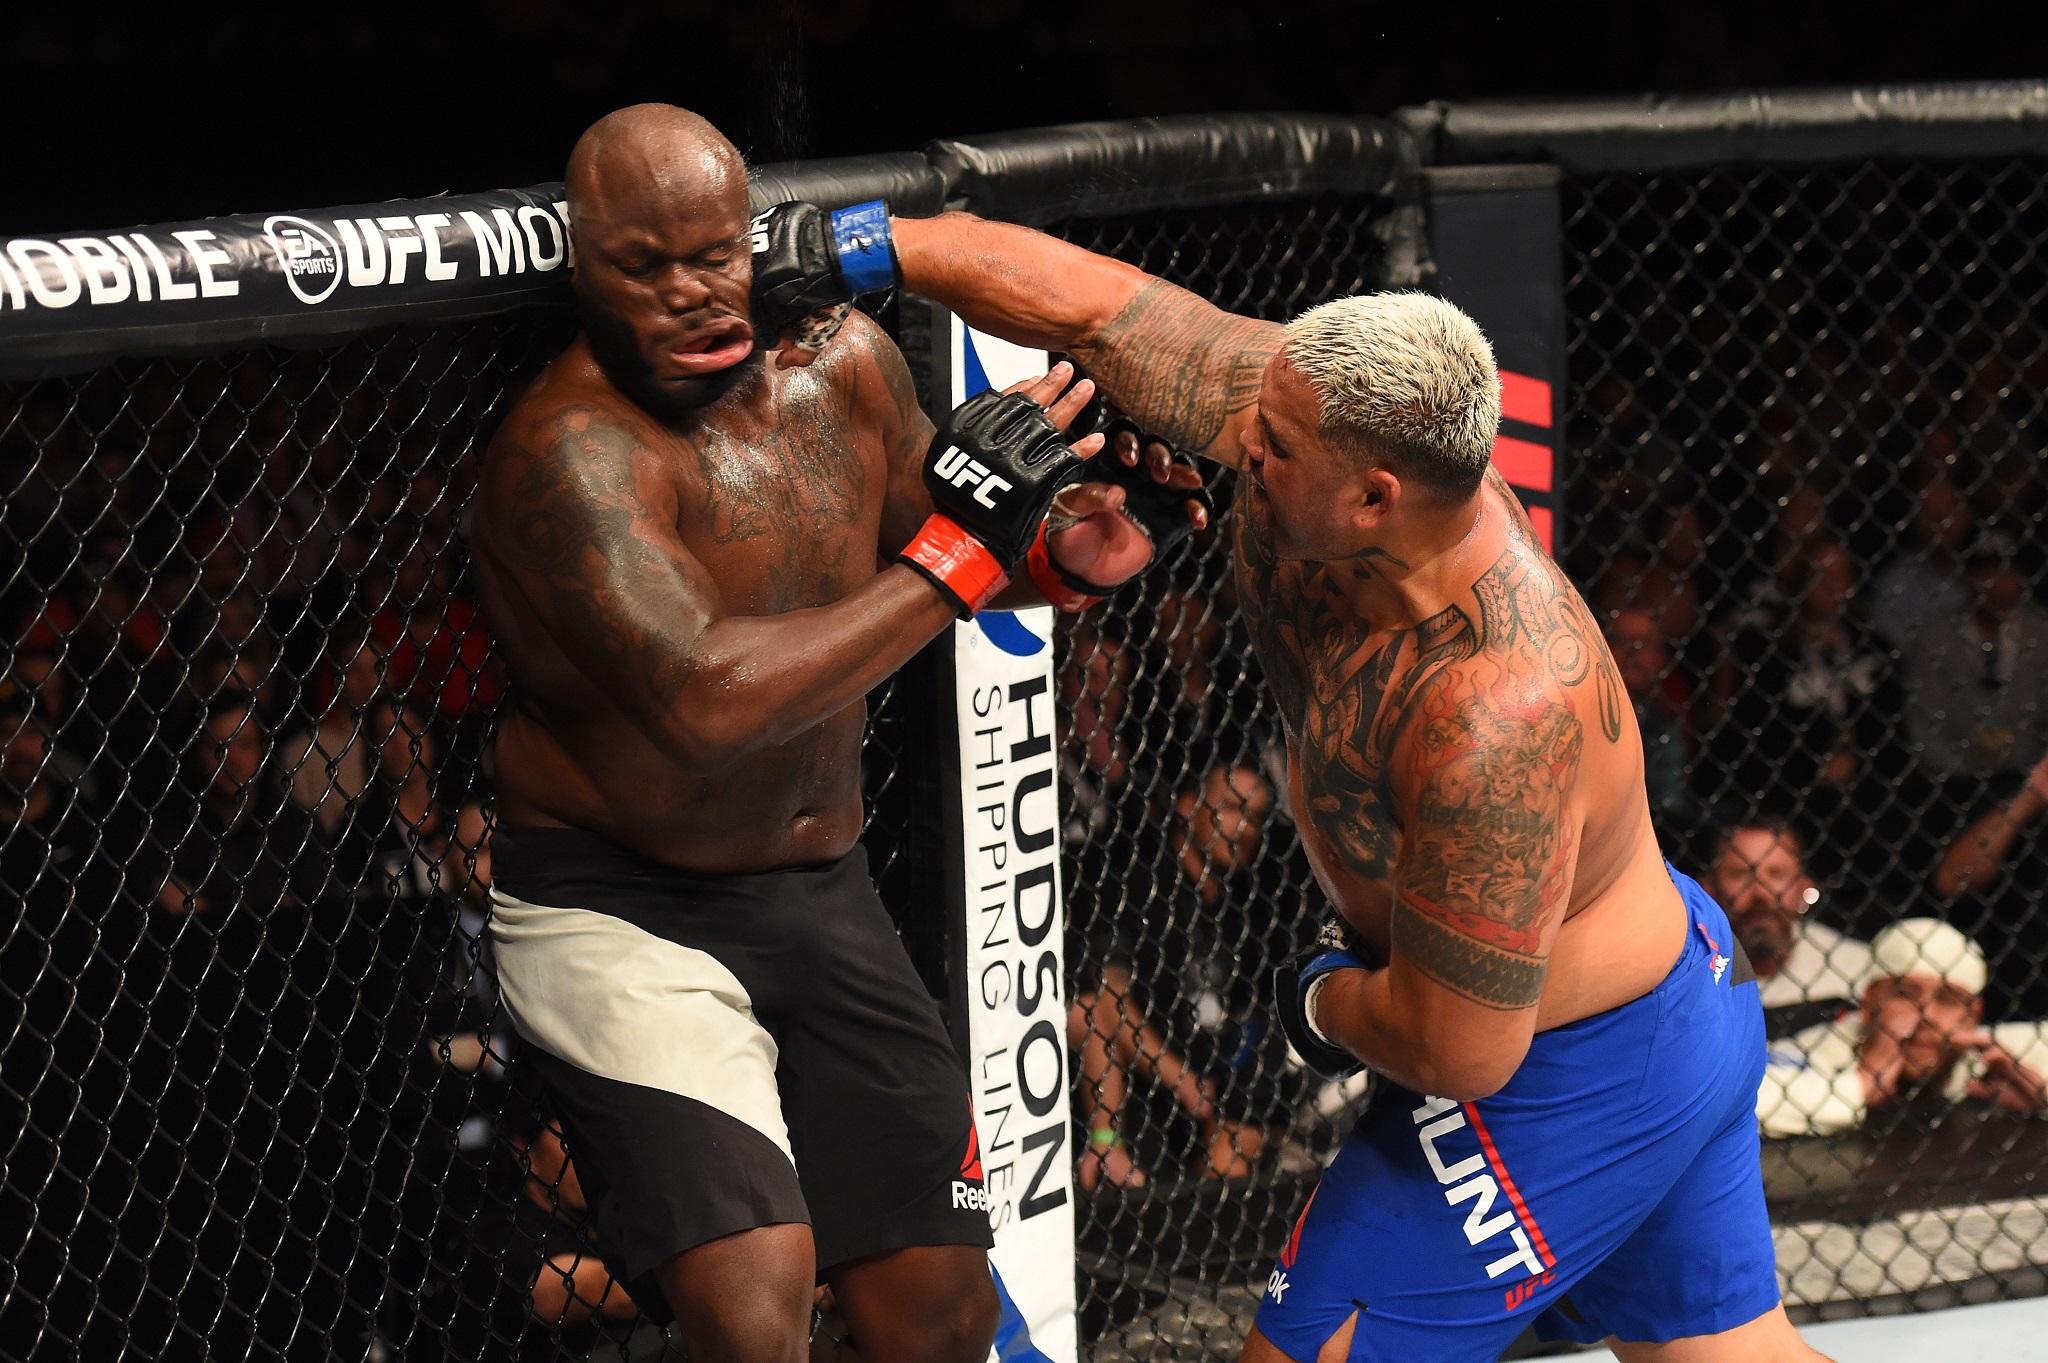 Mark Hunt lands a right hook on Derrick Lewis during their heavyweight bout at UFC Auckland